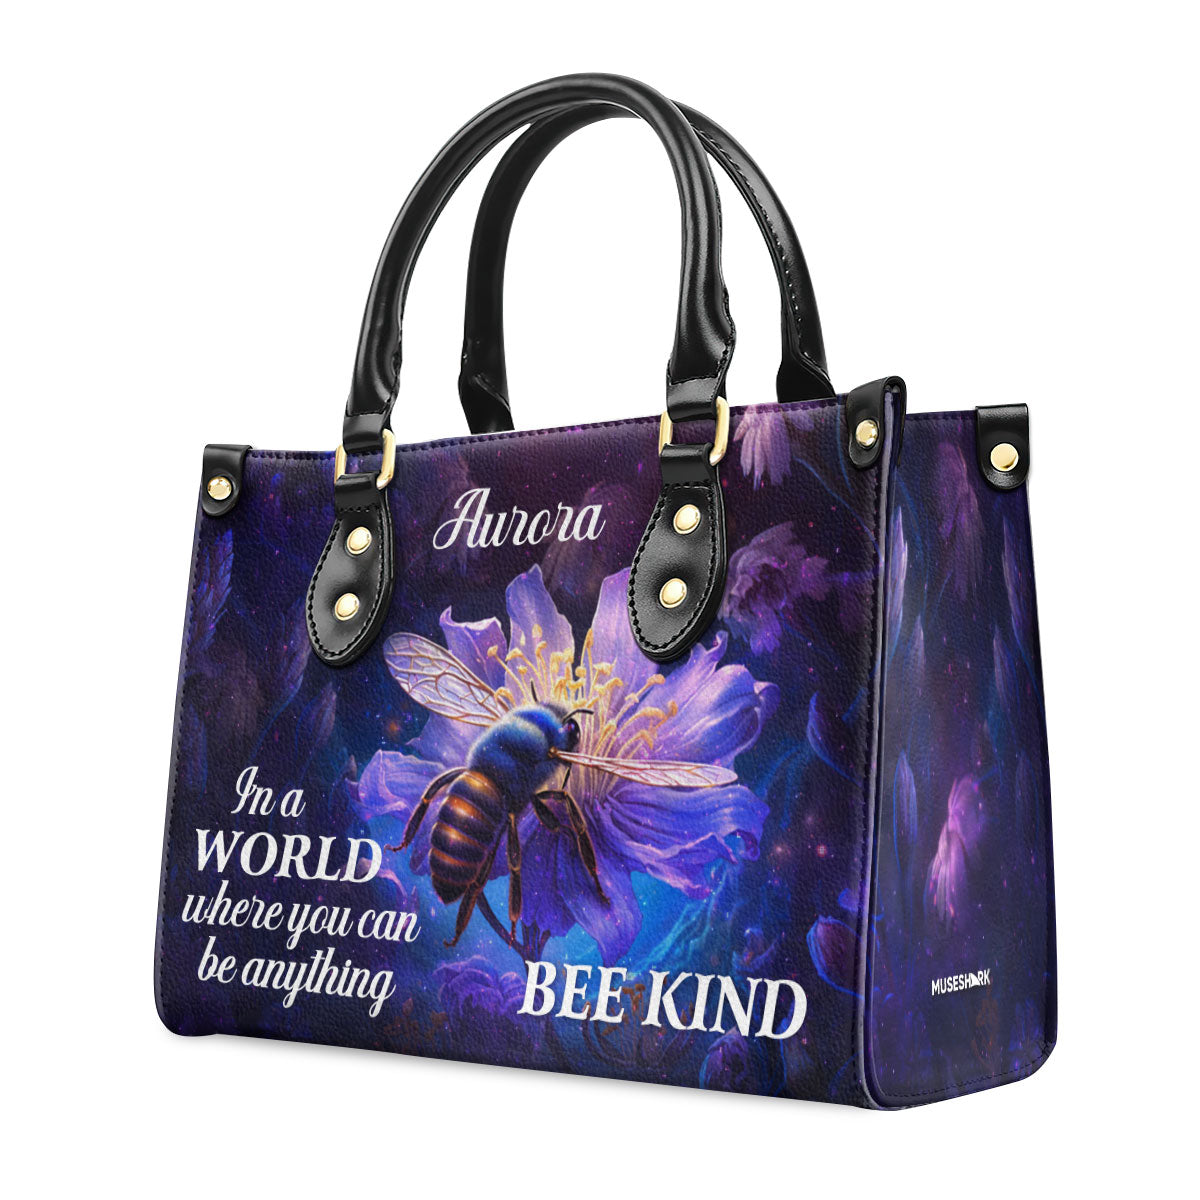 Bee Kind - Personalized Leather Handbag MS-NH30A